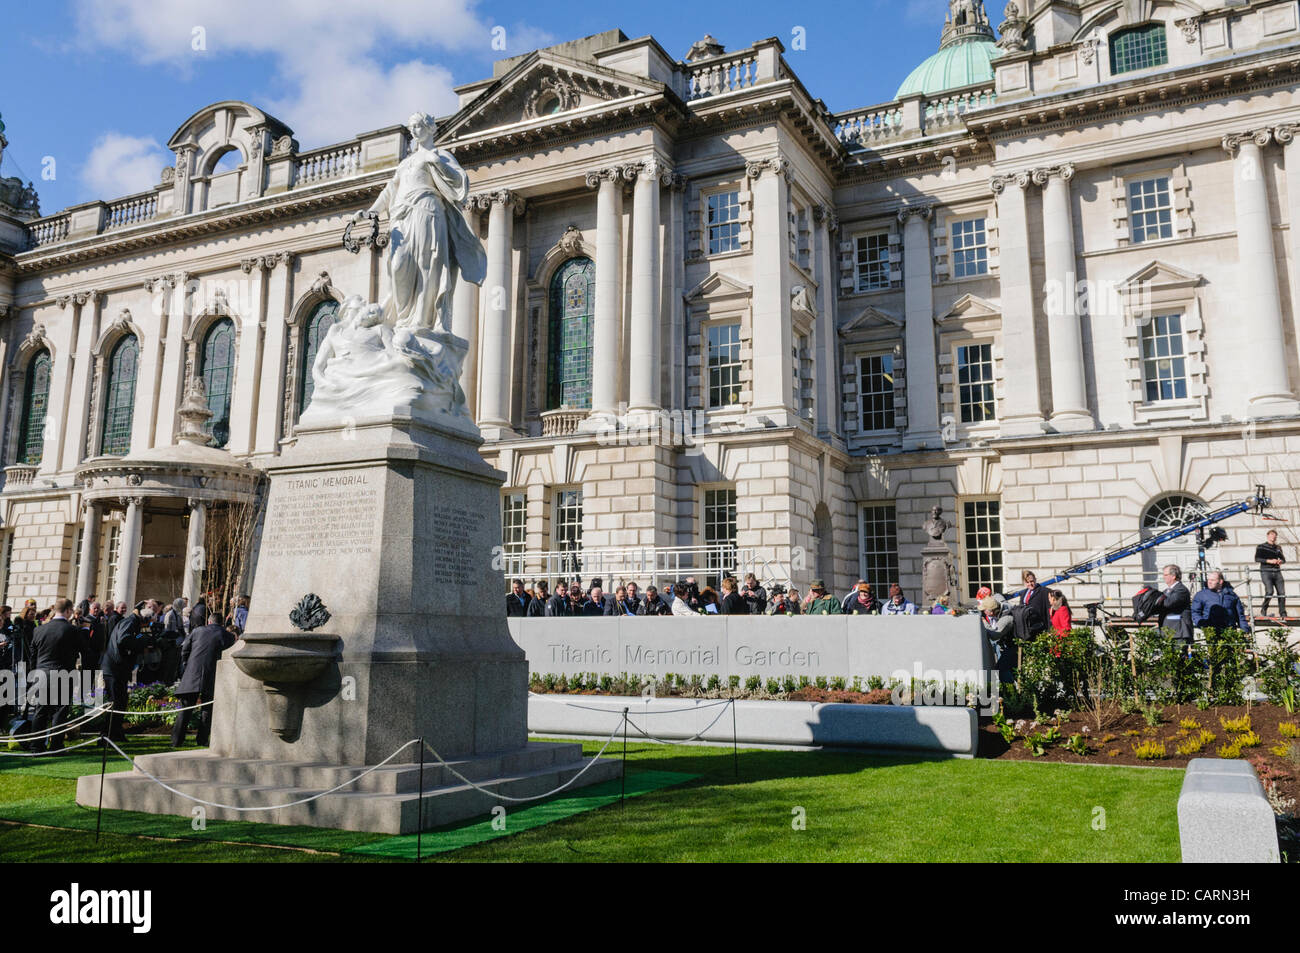 Belfast, UK. 15/04/2012 - Criwds file into the newly opened Titanic Memorial Garden at Belfast City Hall. Stock Photo